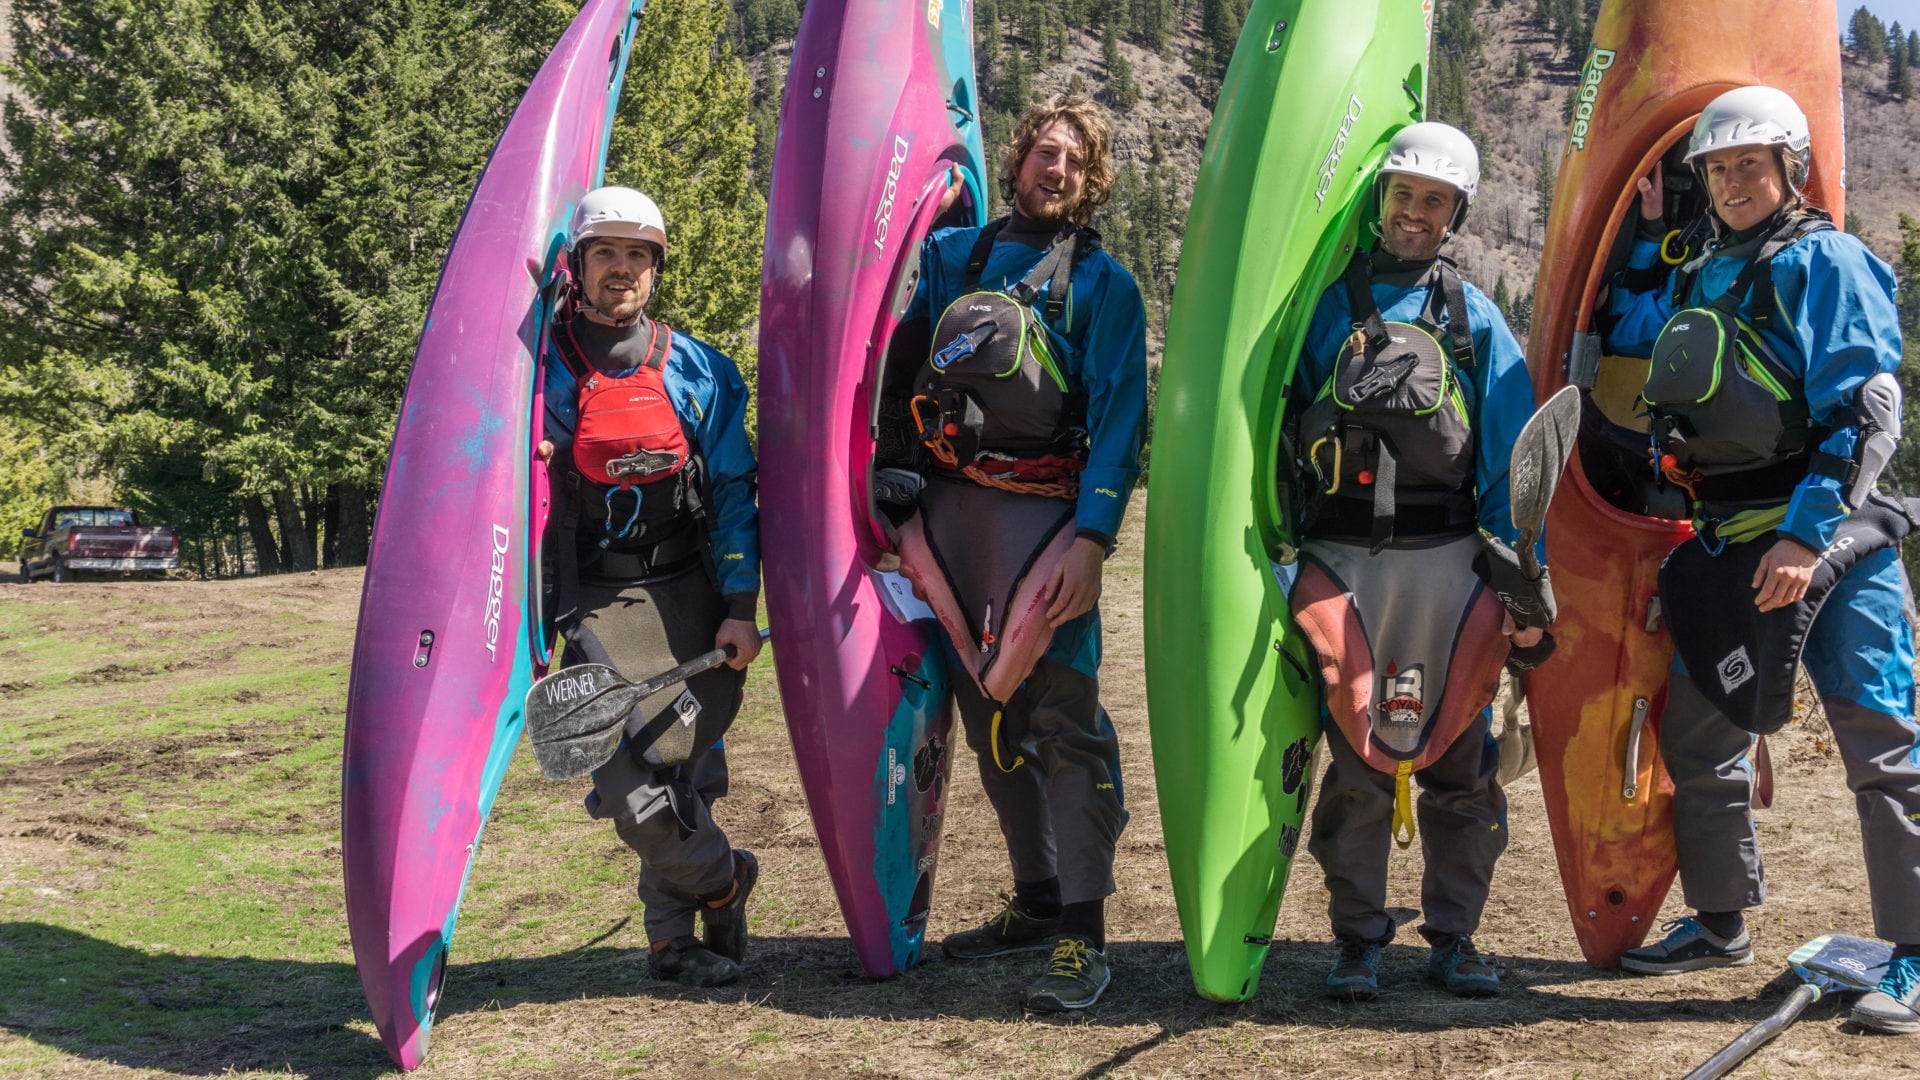 A Beginners Guide to Whitewater Kayaking Gear - Kootenay Mountain Culture